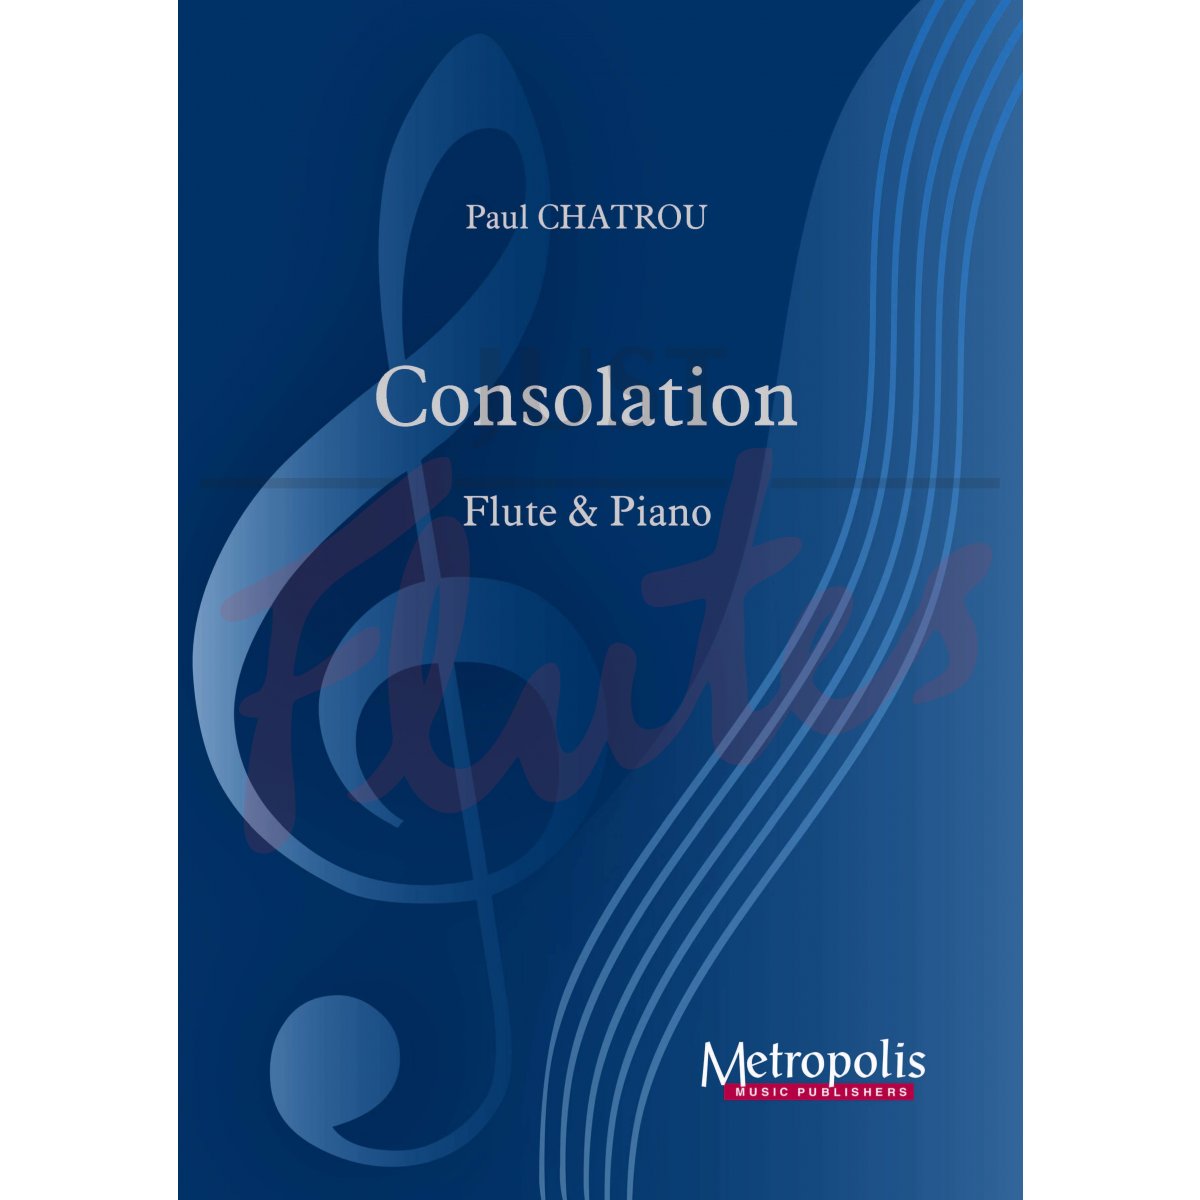 Consolidation for Flute and Piano